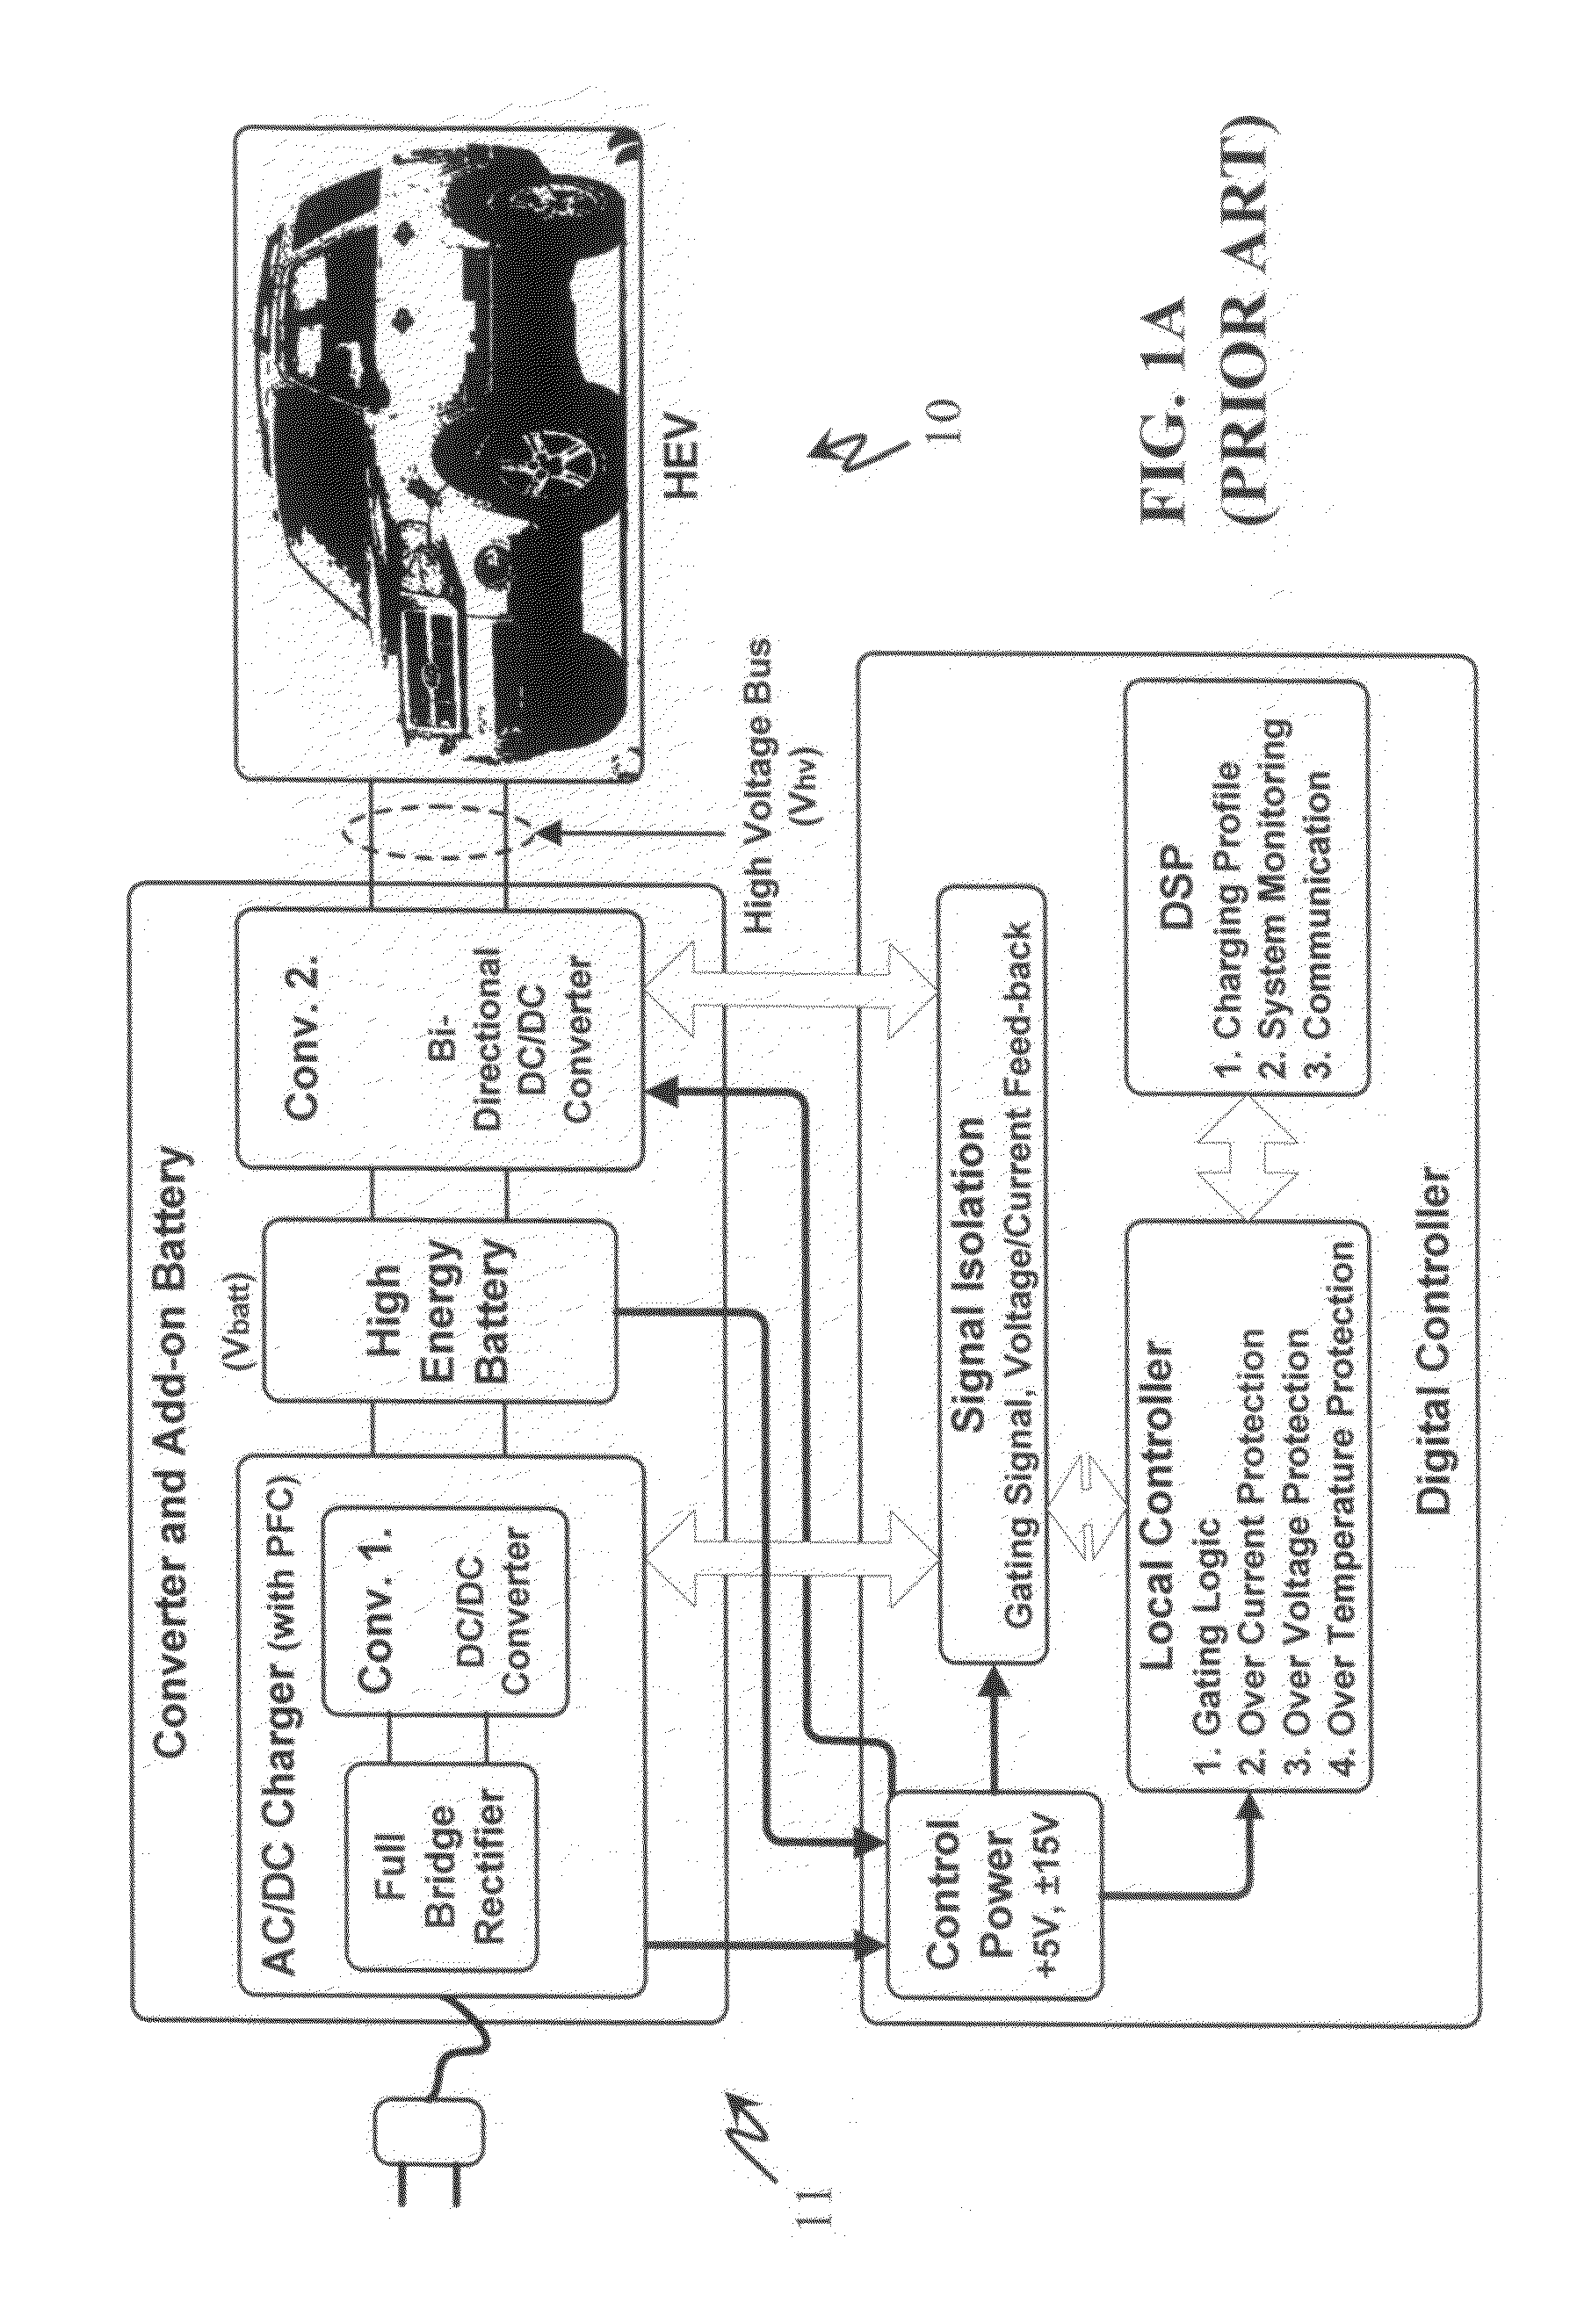 Integrated bi-directional converter for plug-in hybrid electric vehicles